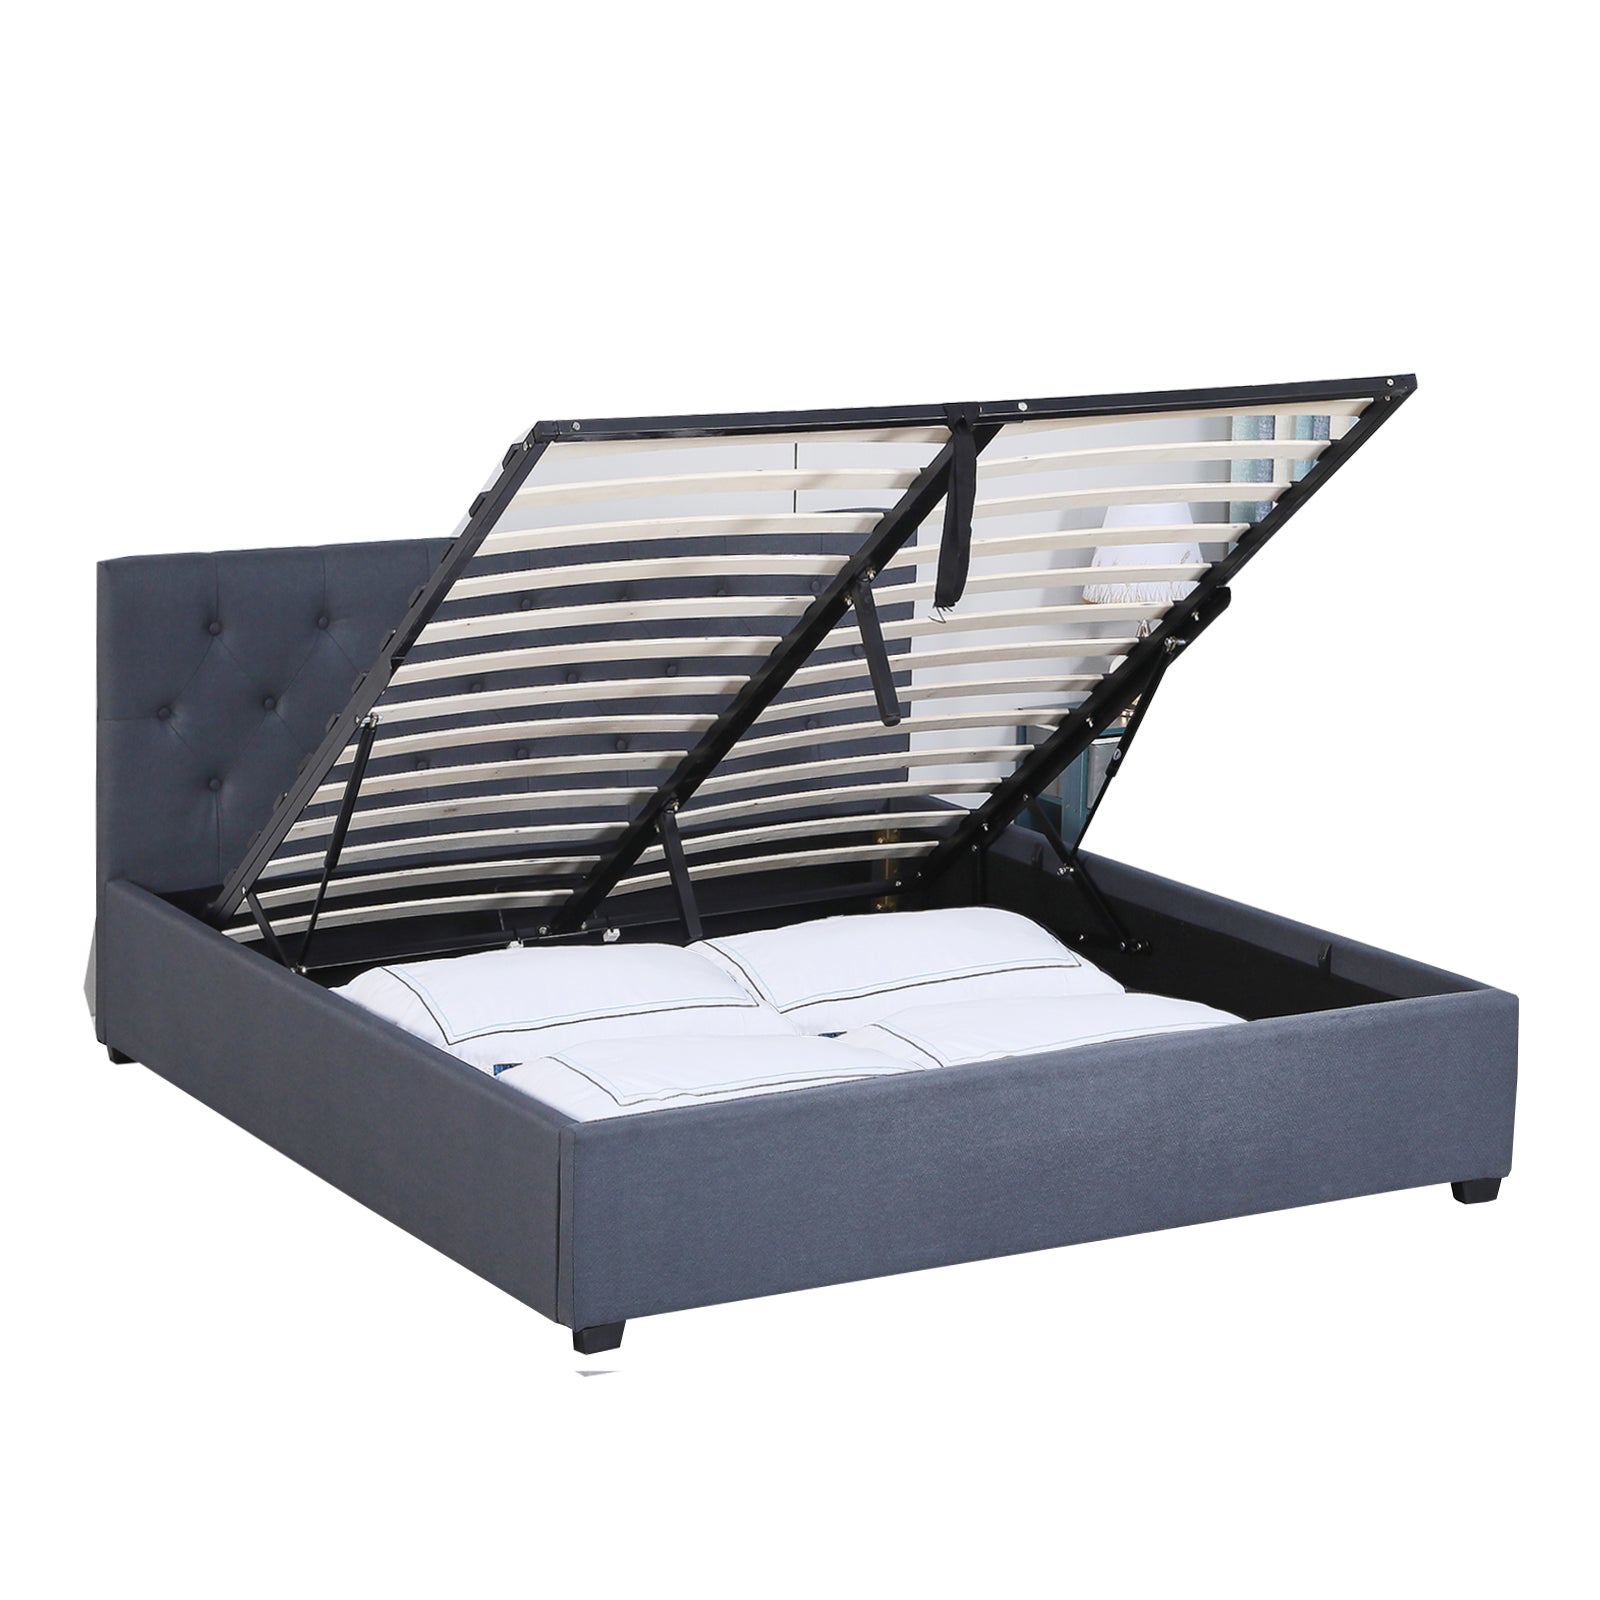 Milano Capri Luxury Gas Lift Bed With Headboard (Model 3) - Charcoal No.35 - King